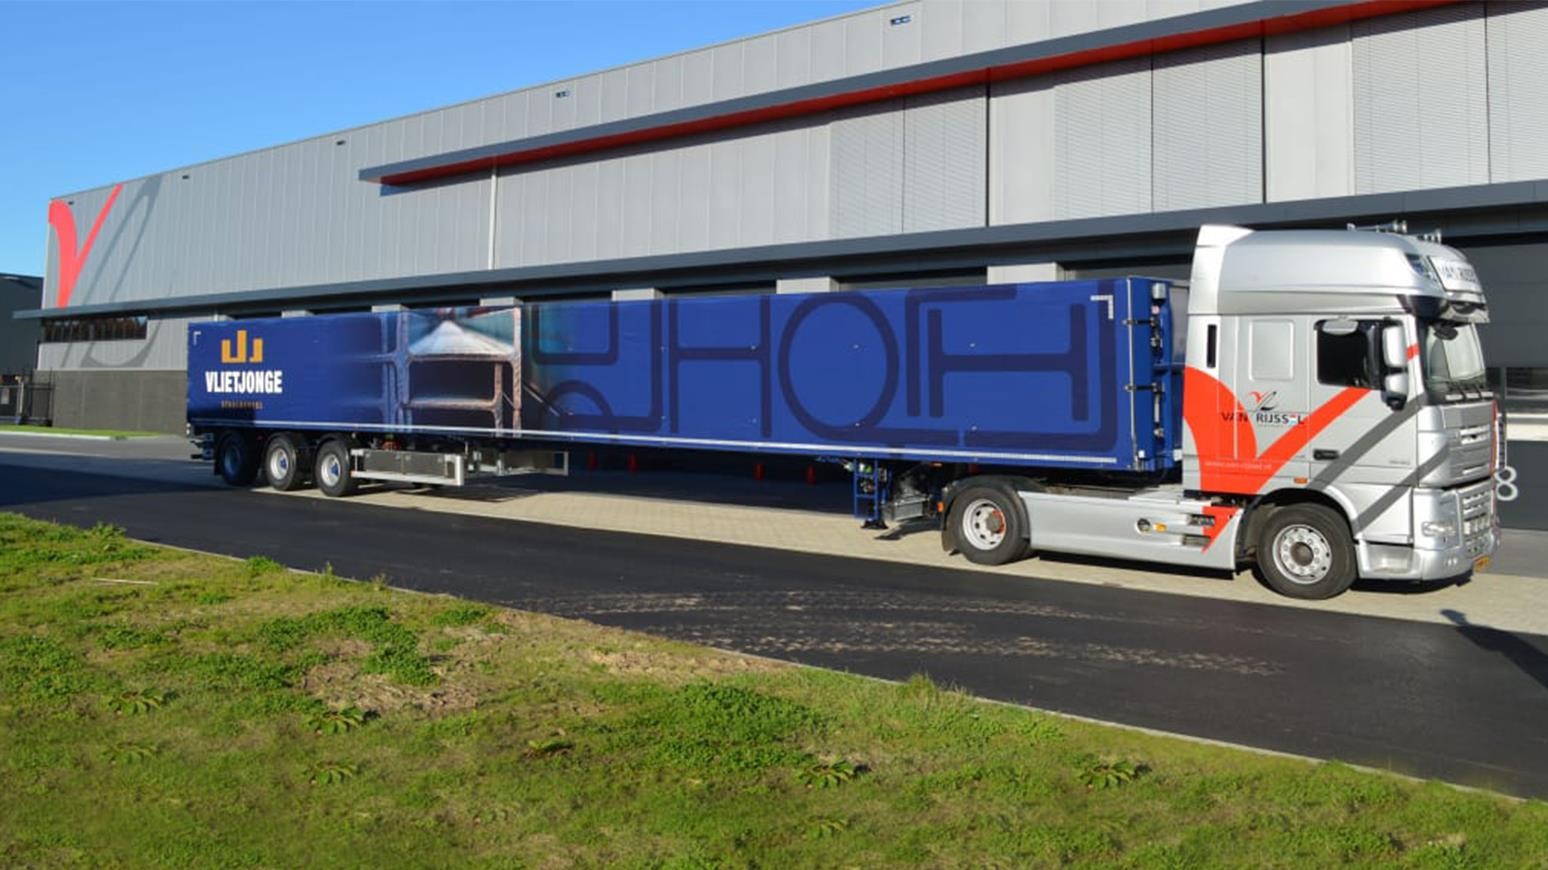 Nooteboom Introduces New Teletrailer Extendible Floor Flatbed Trailer With Netcap Sliding Canopy System